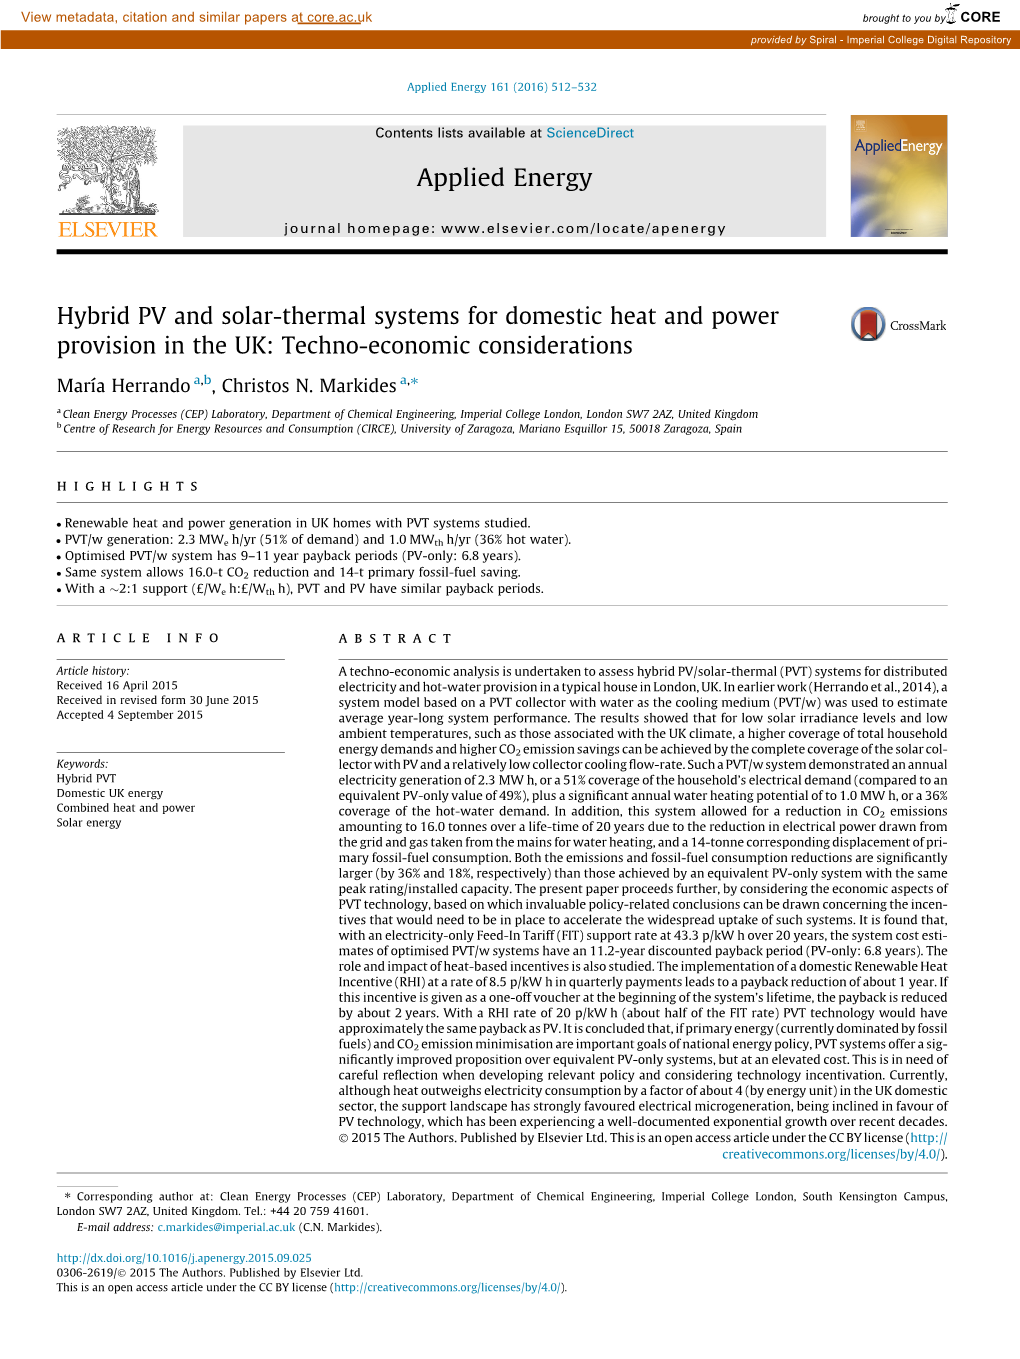 Hybrid PV and Solar-Thermal Systems for Domestic Heat and Power Provision in the UK: Techno-Economic Considerations ⇑ María Herrando A,B, Christos N